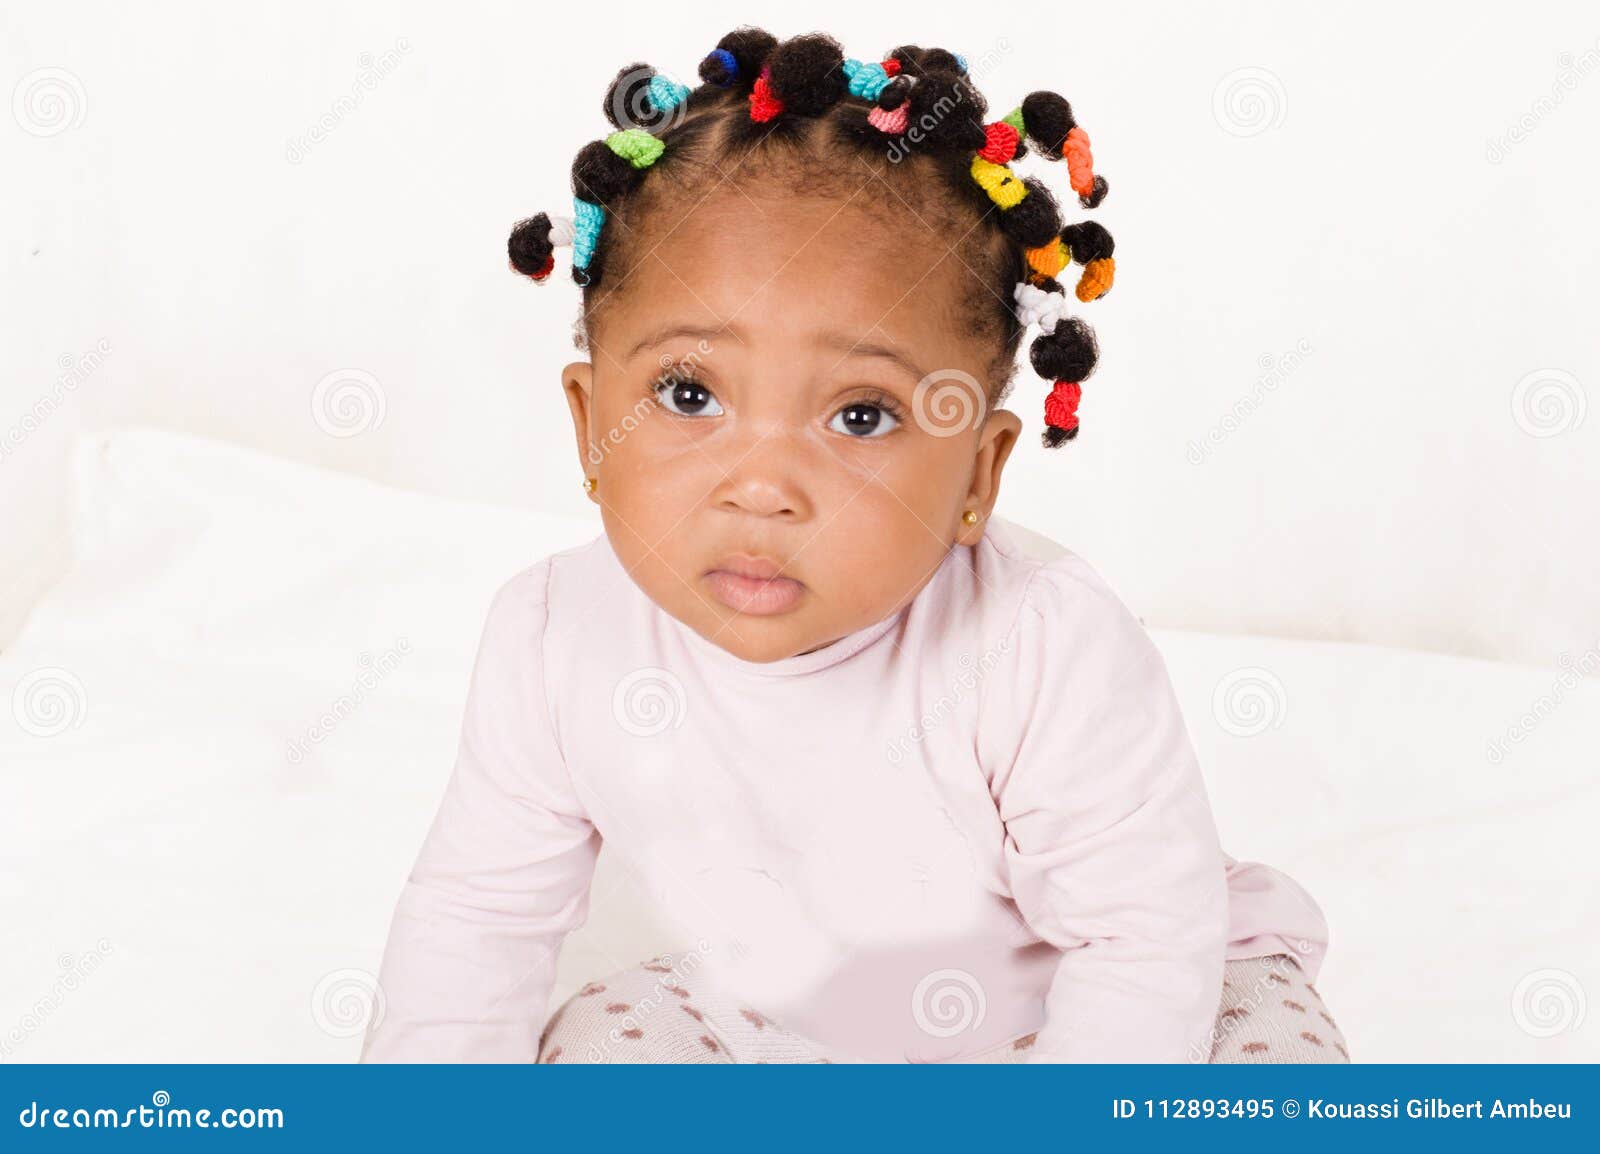 portrait of an infant girl looking at the camera.